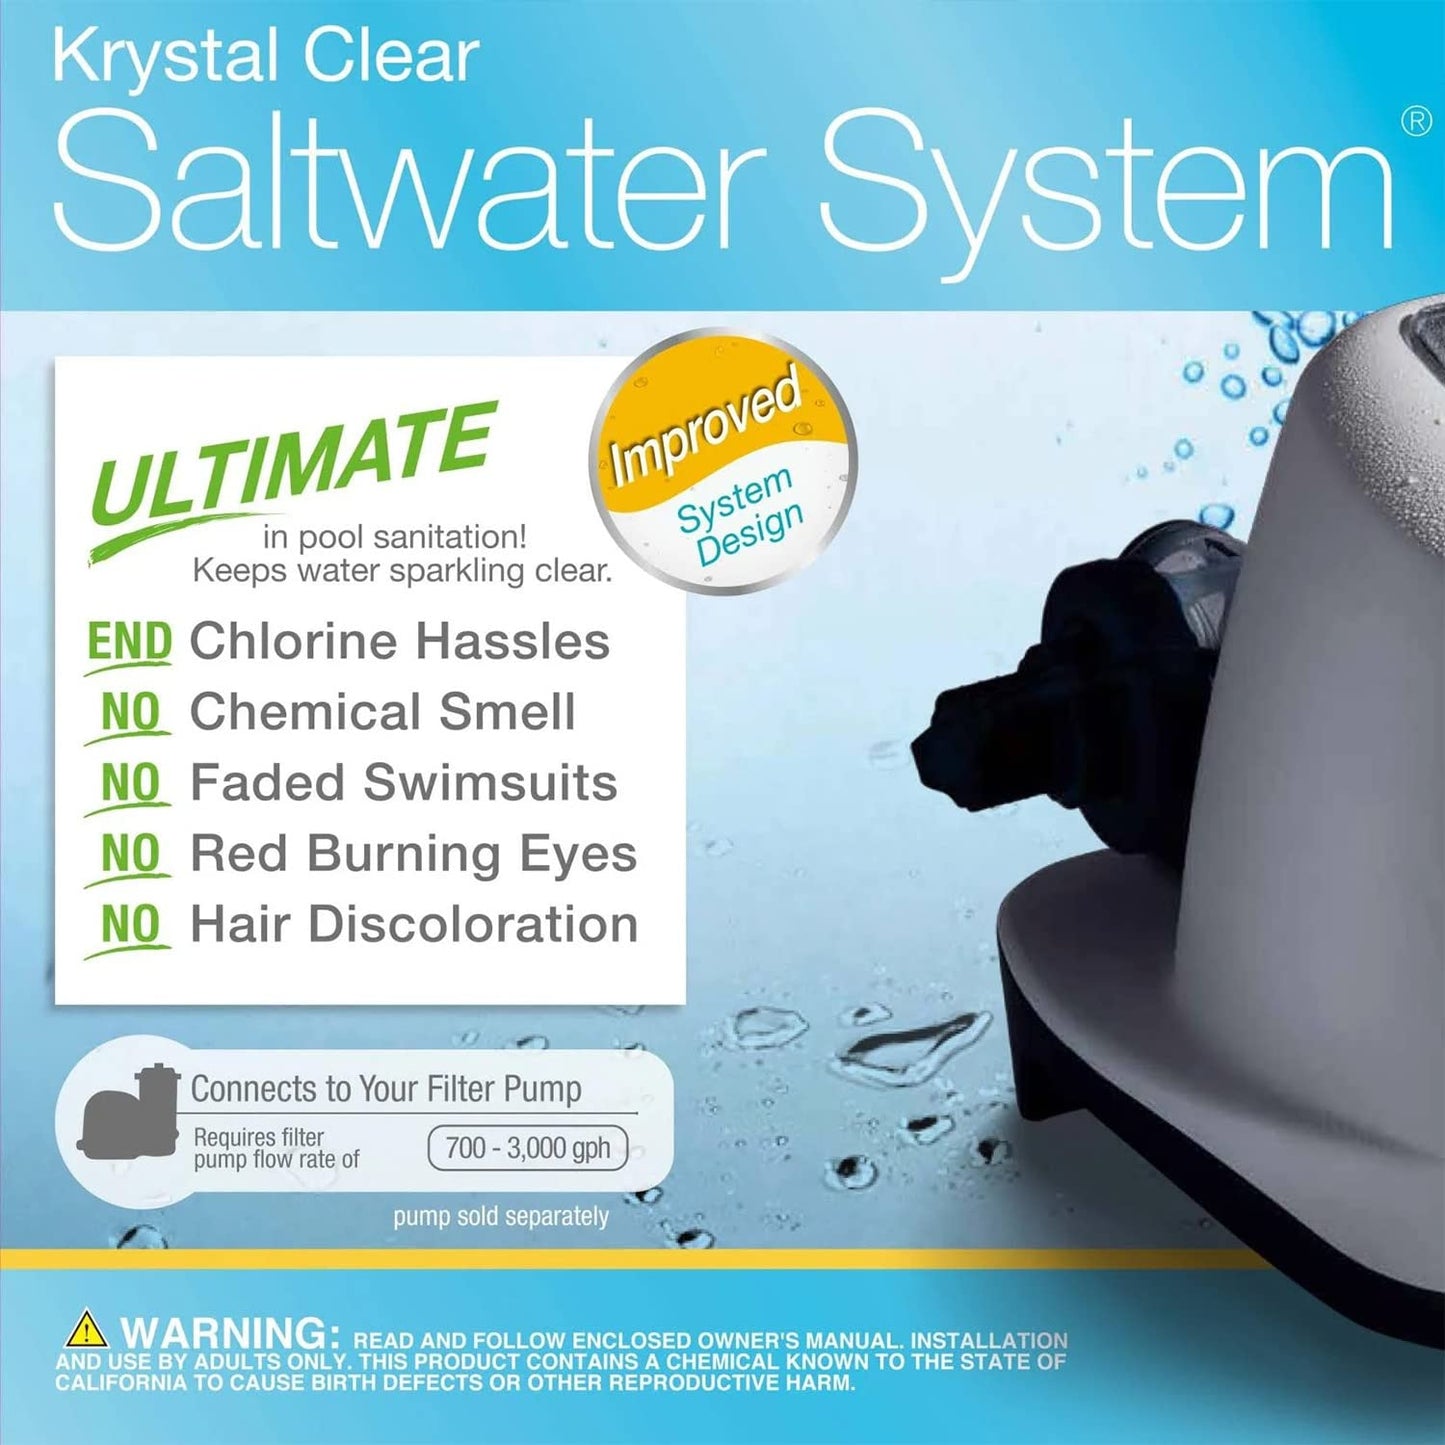 Intex 26663EG Krystal Clear Saltwater System for Above Ground Pools Up to 4500 Gallons with Automatic Timer and Ground Fault Circuit Interrupter